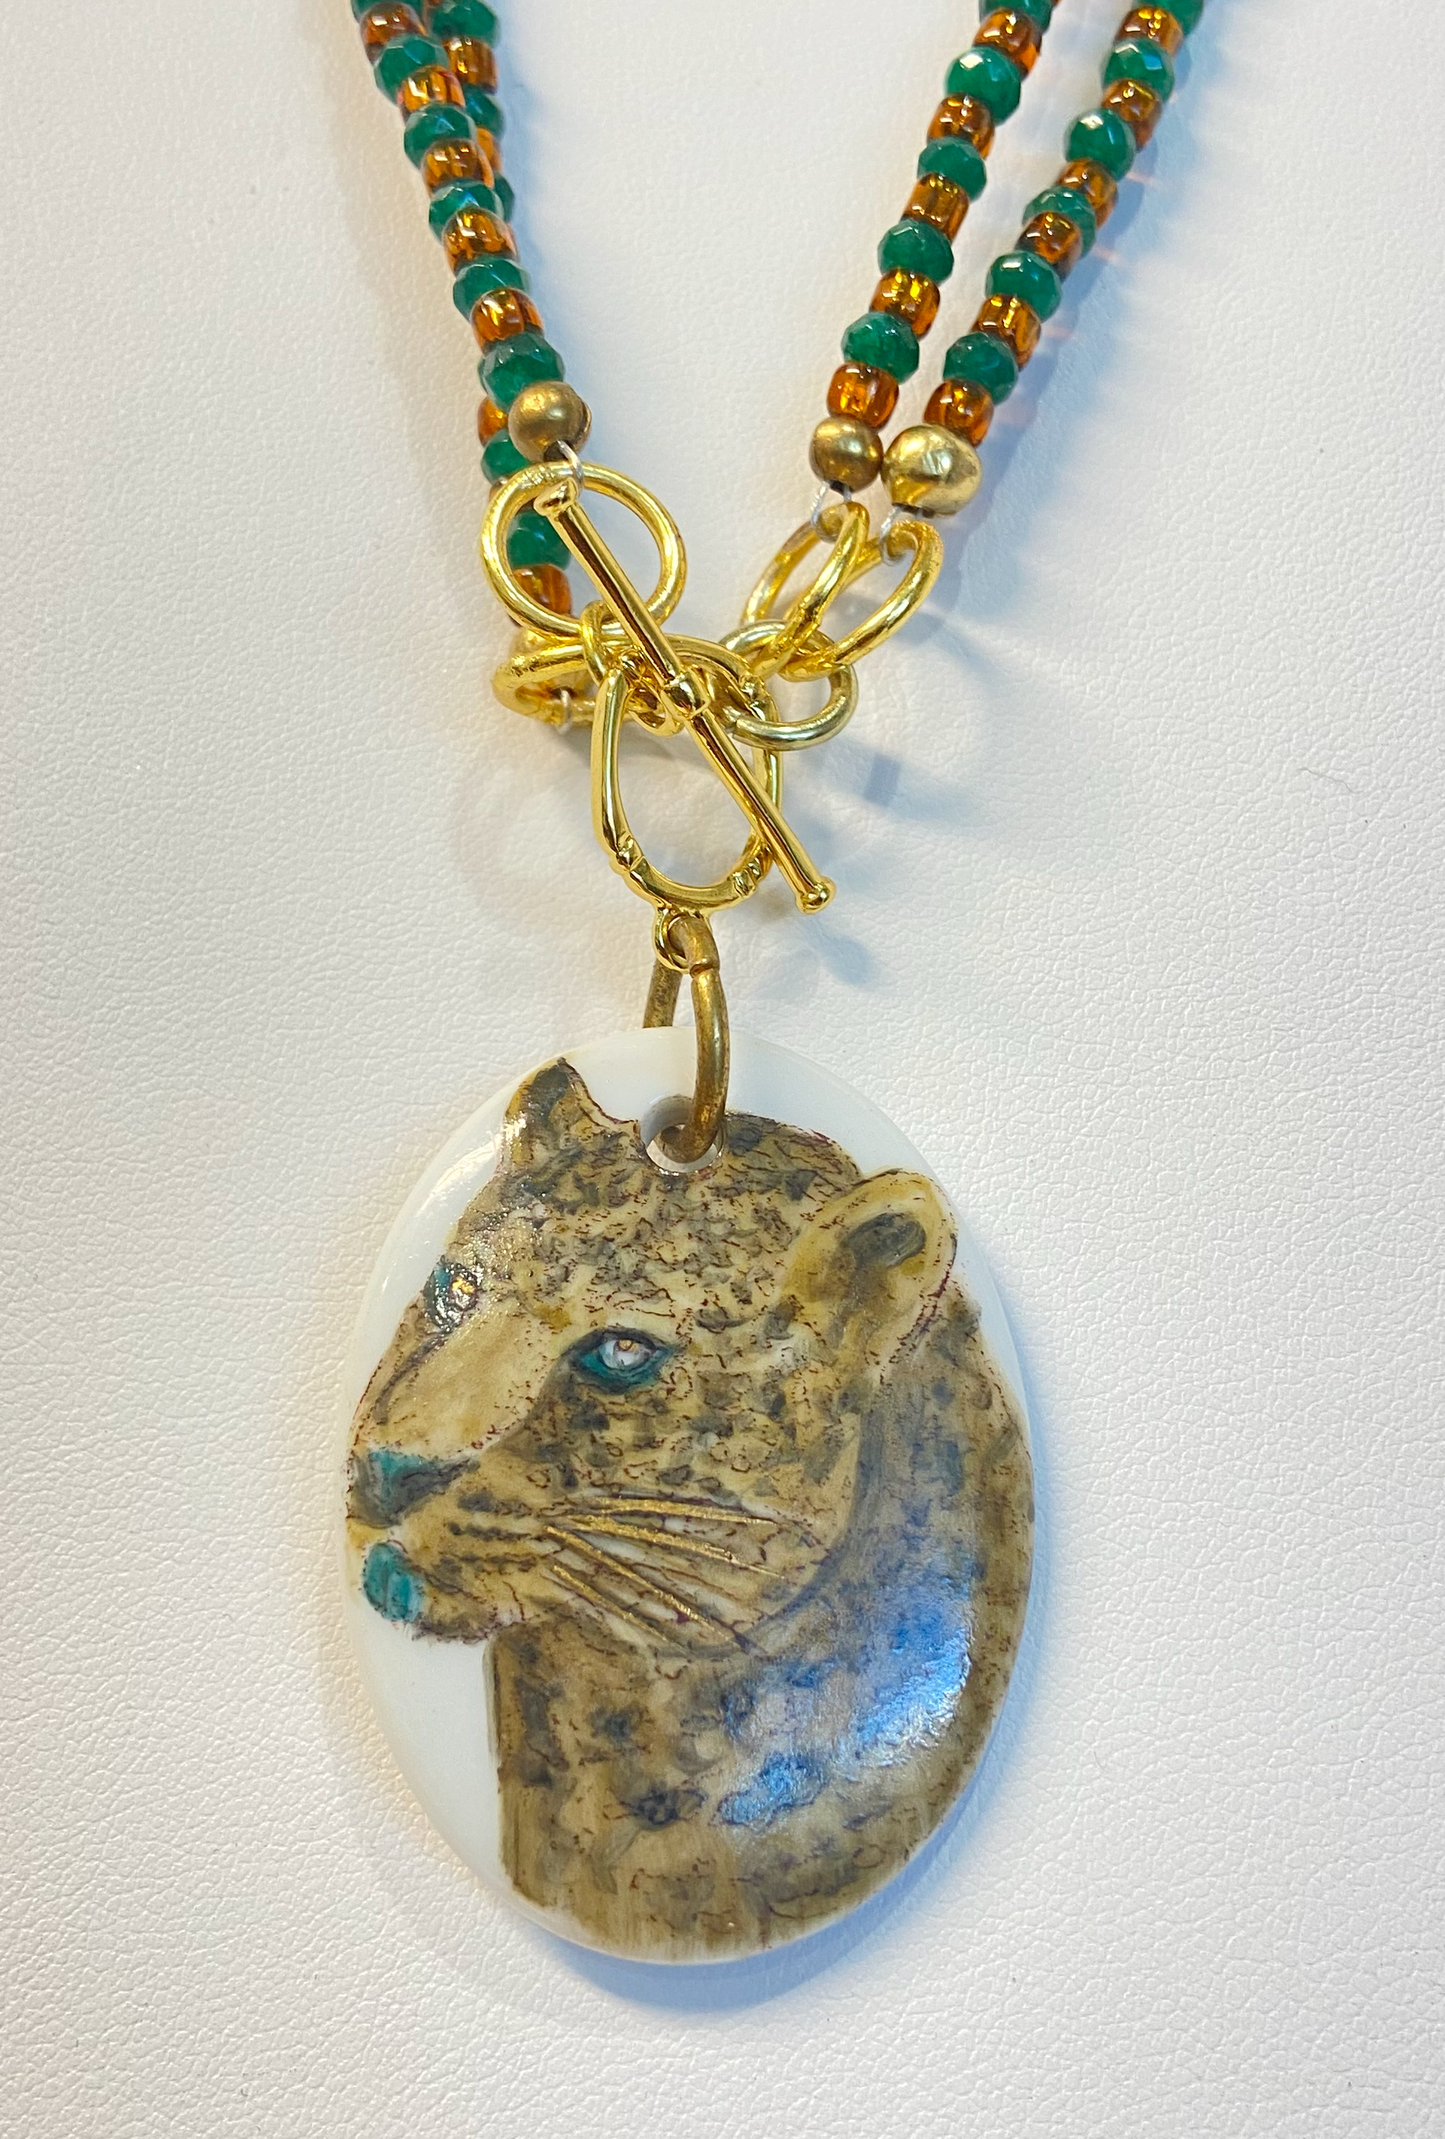 A GIFT, GIFT FOR THE JAGUAR LOVER, JAGUAR NECKLACE TEAL AND GOLD NECKLACE ANIMAL JEWELRY ANIMAL NECKLACE